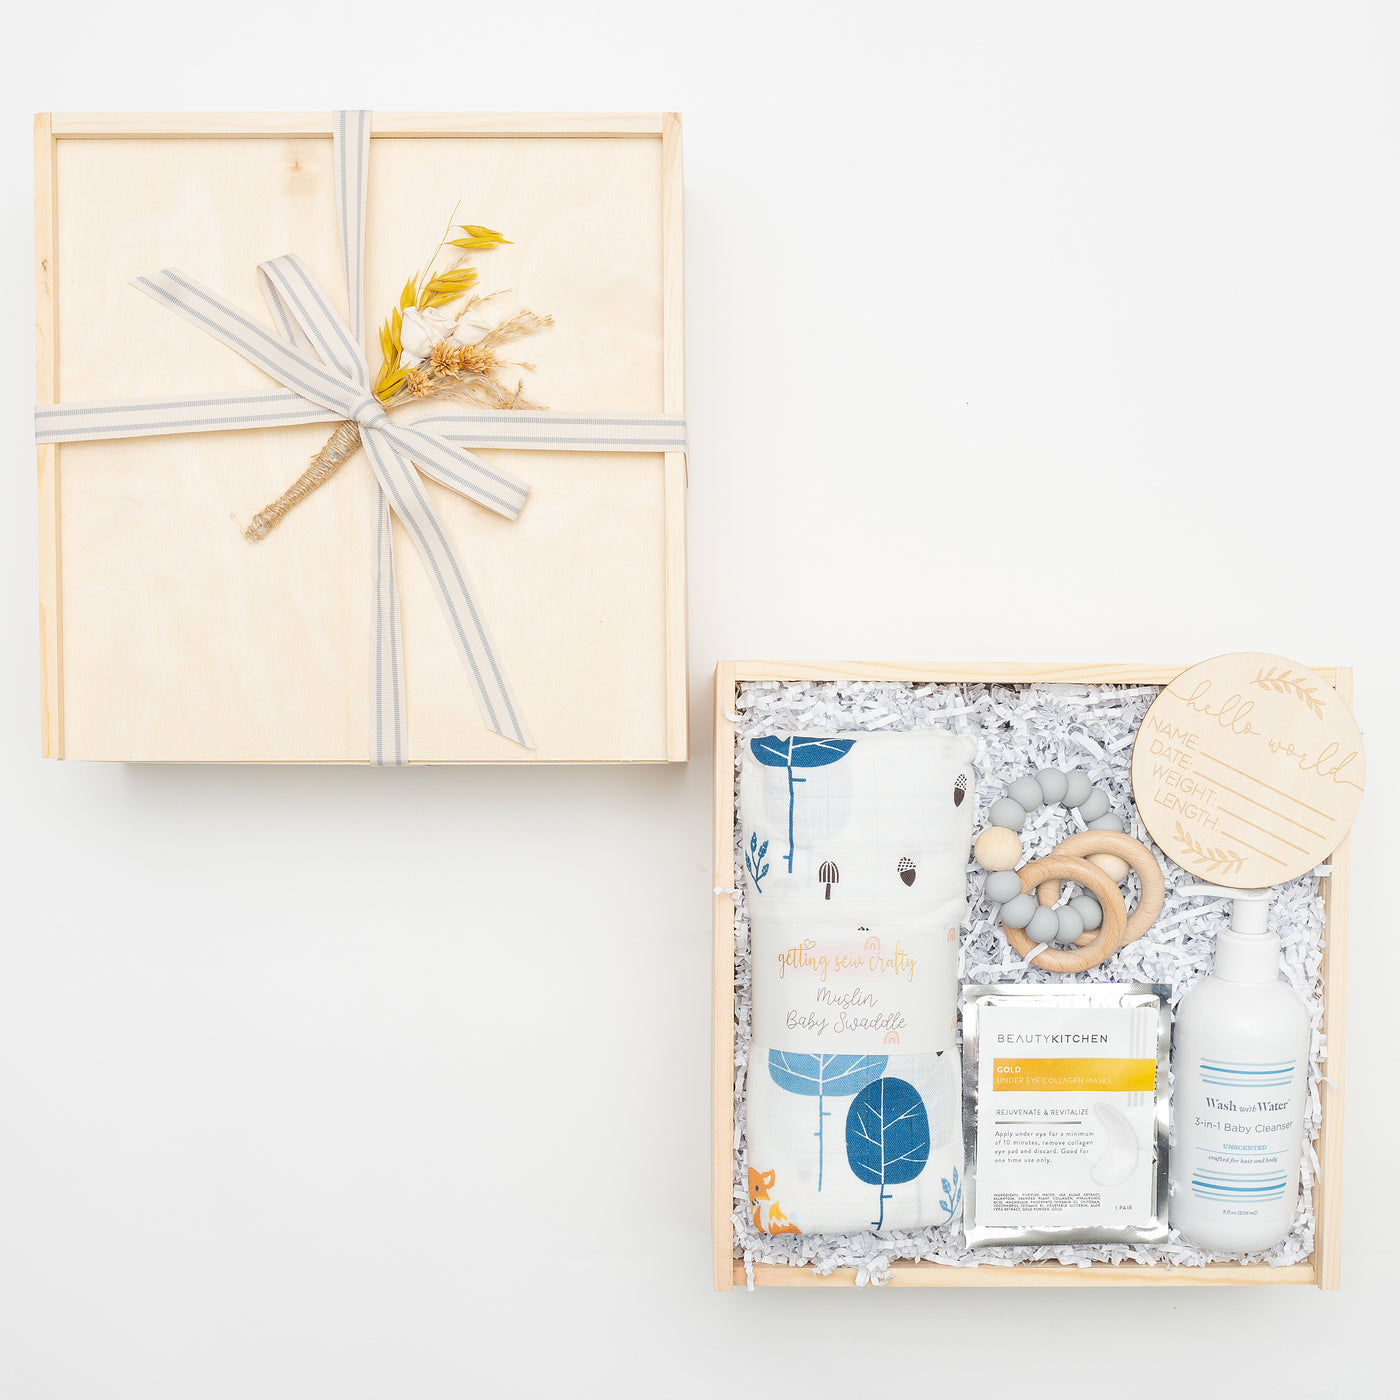 Celebrate the milestone of a new baby (and mom!) in your life with this thoughtful and elegant gift box.